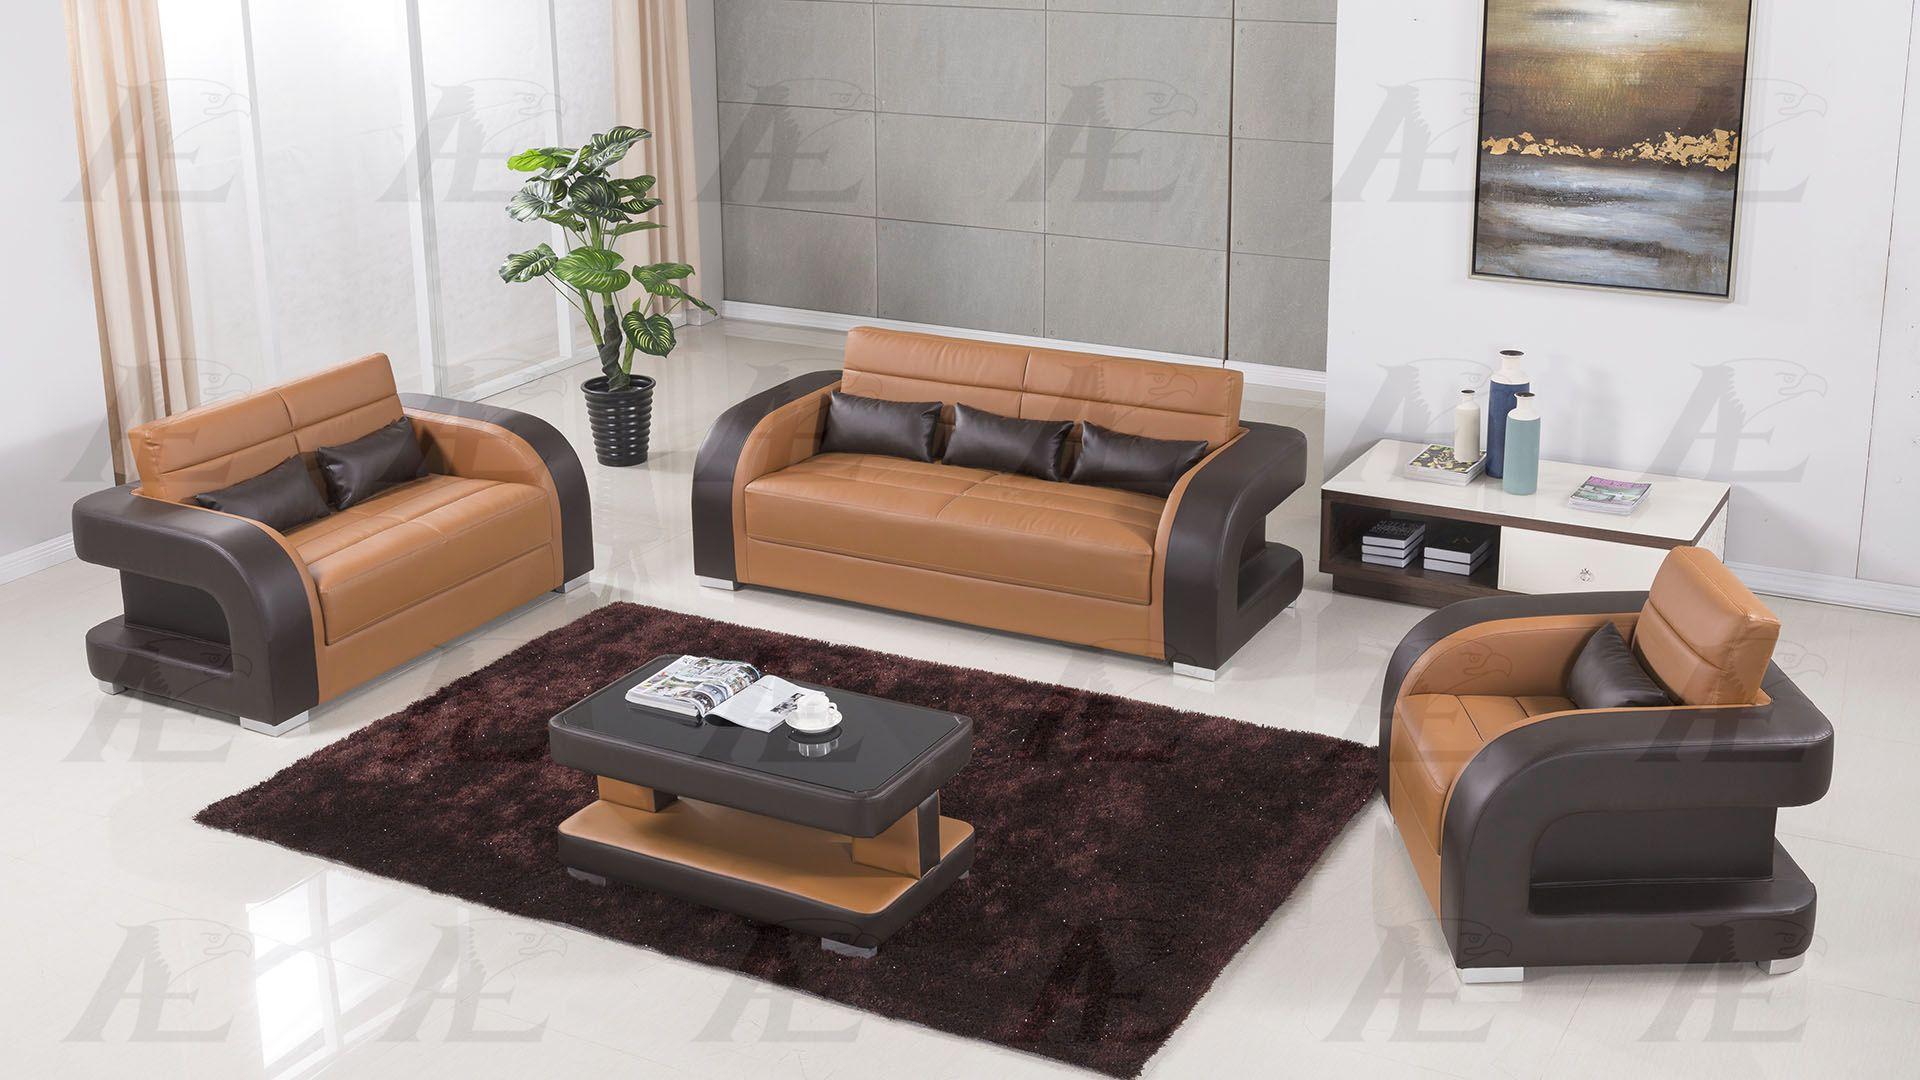 Contemporary, Modern Sofa Set AE-D816 AE-D816-CA.DB-Set-3 in Camel, Dark Brown Bonded Leather